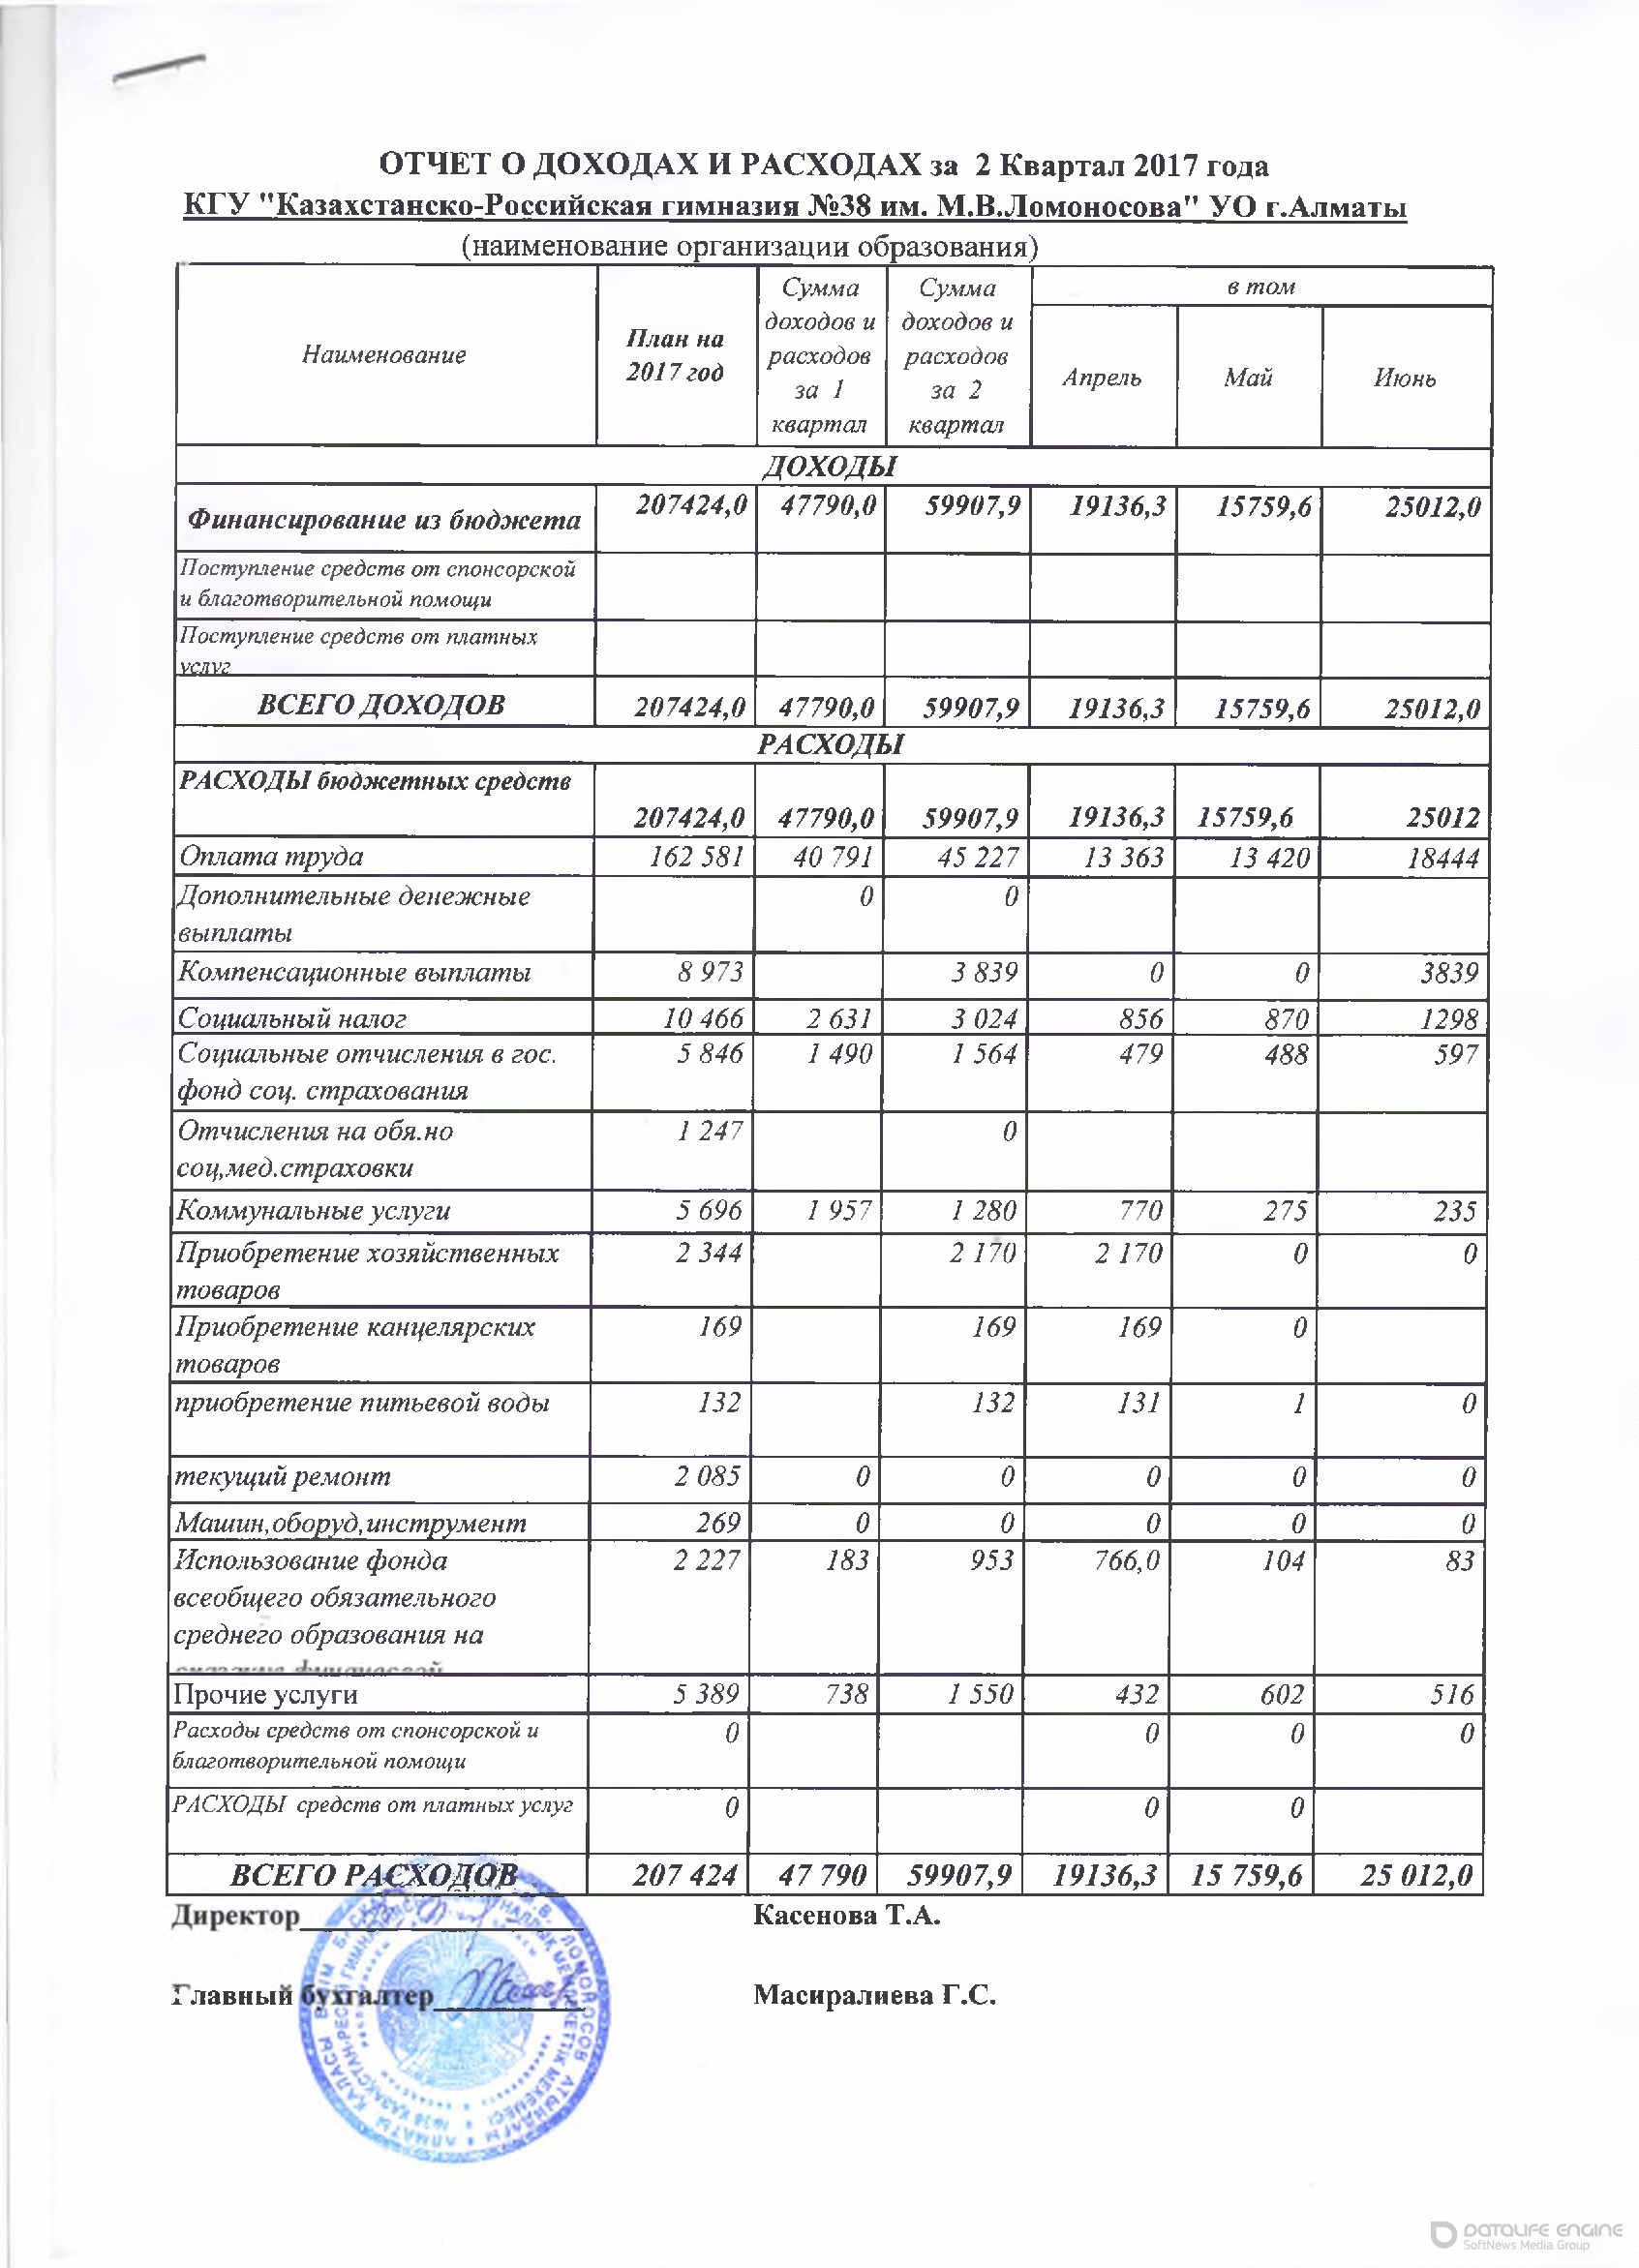 Statement of income and expenses за 2 квартал 2017 г